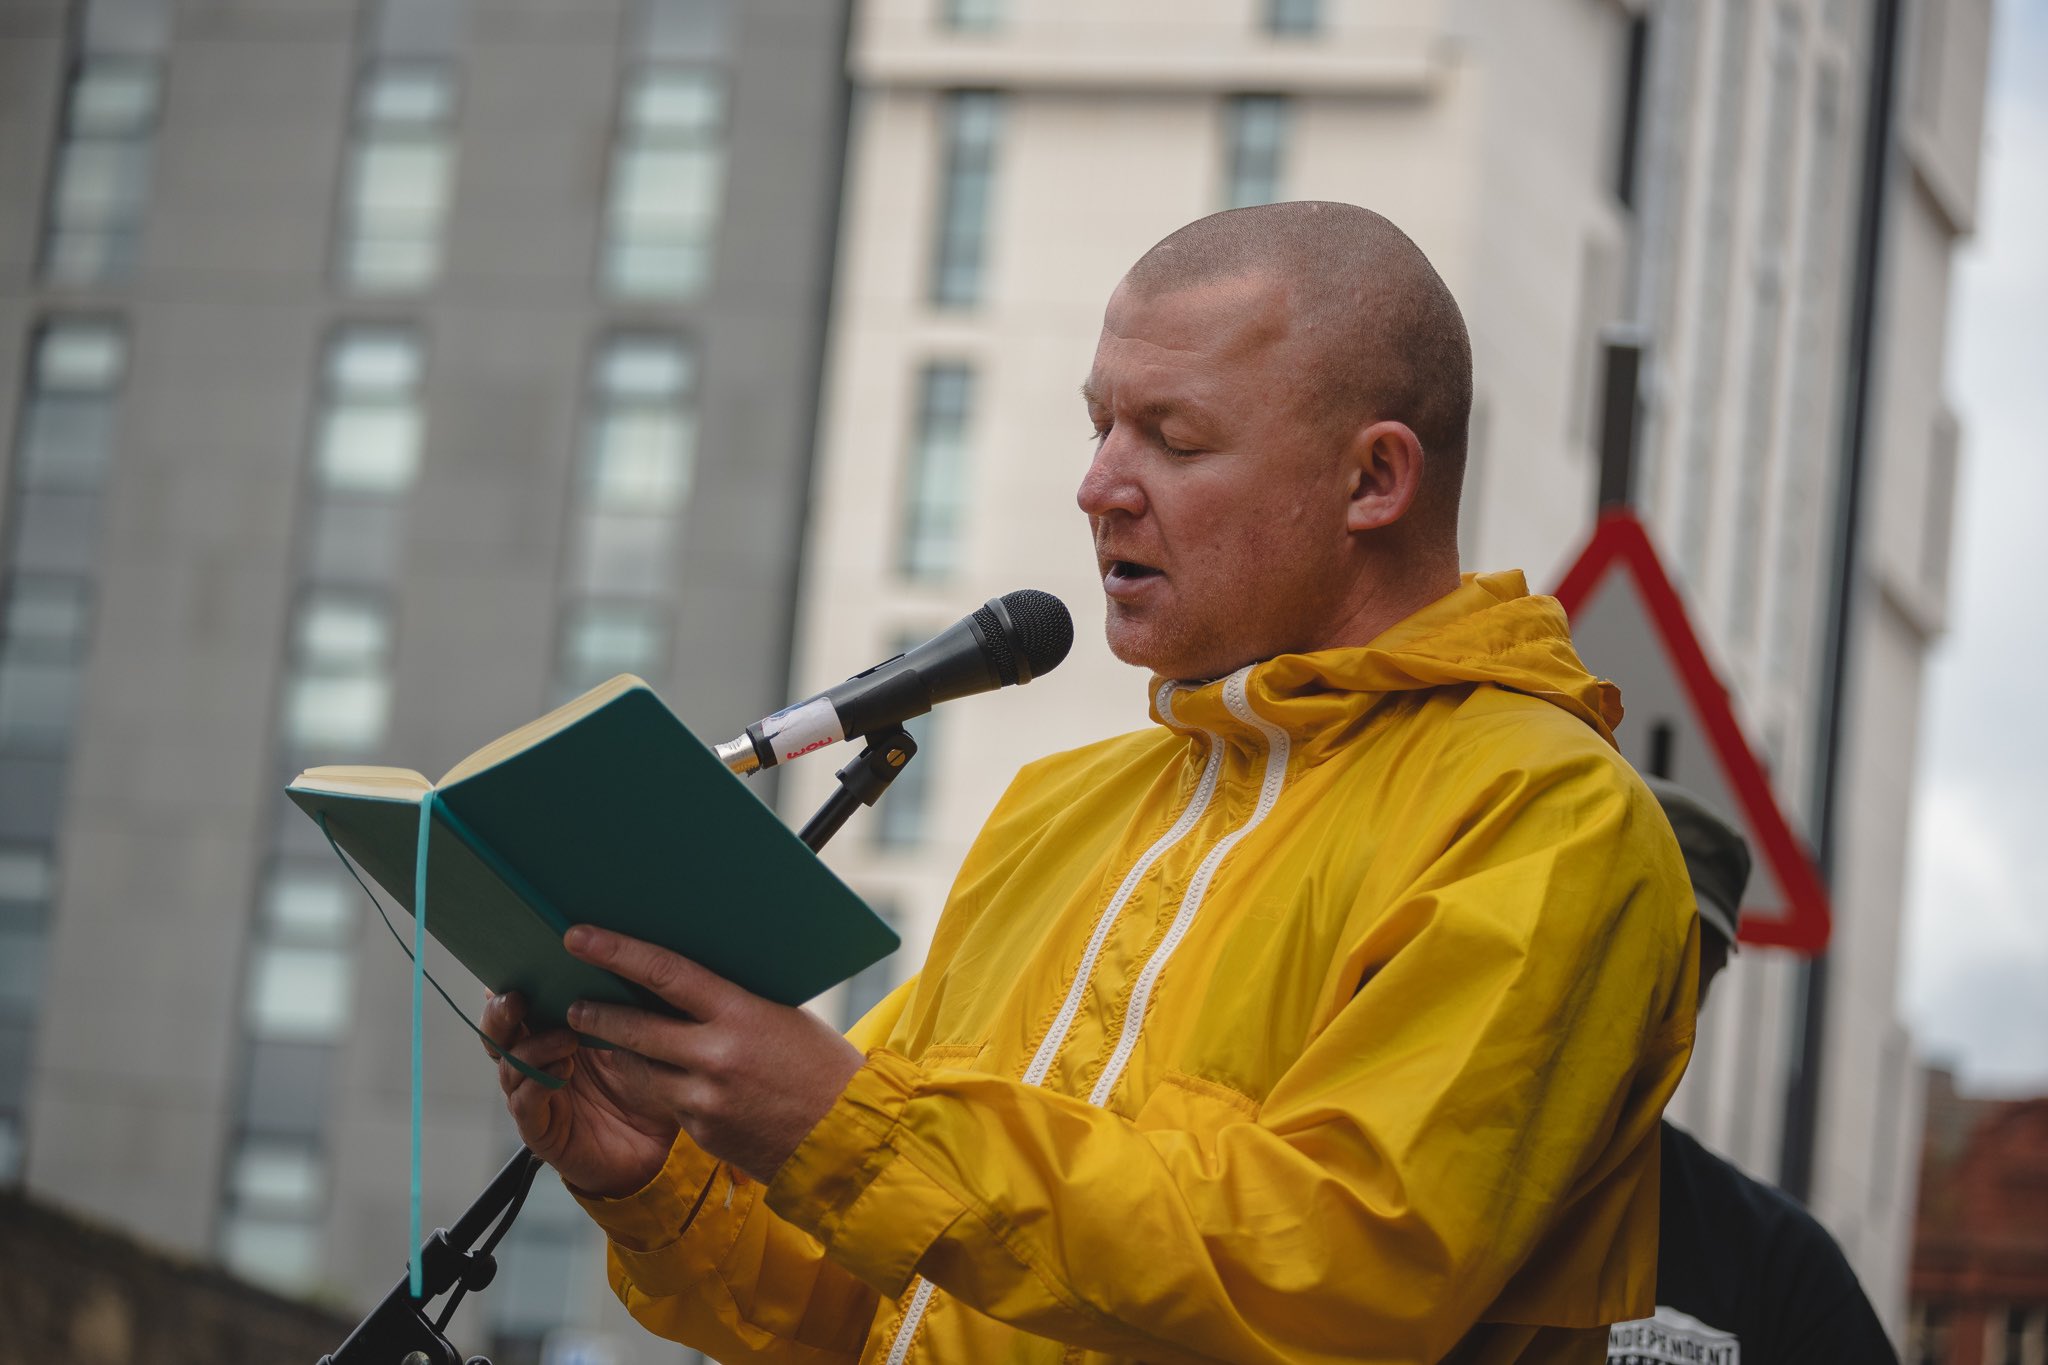 writers bloc writer roy in yellow jacket reading from a green noebook for writing on the wall